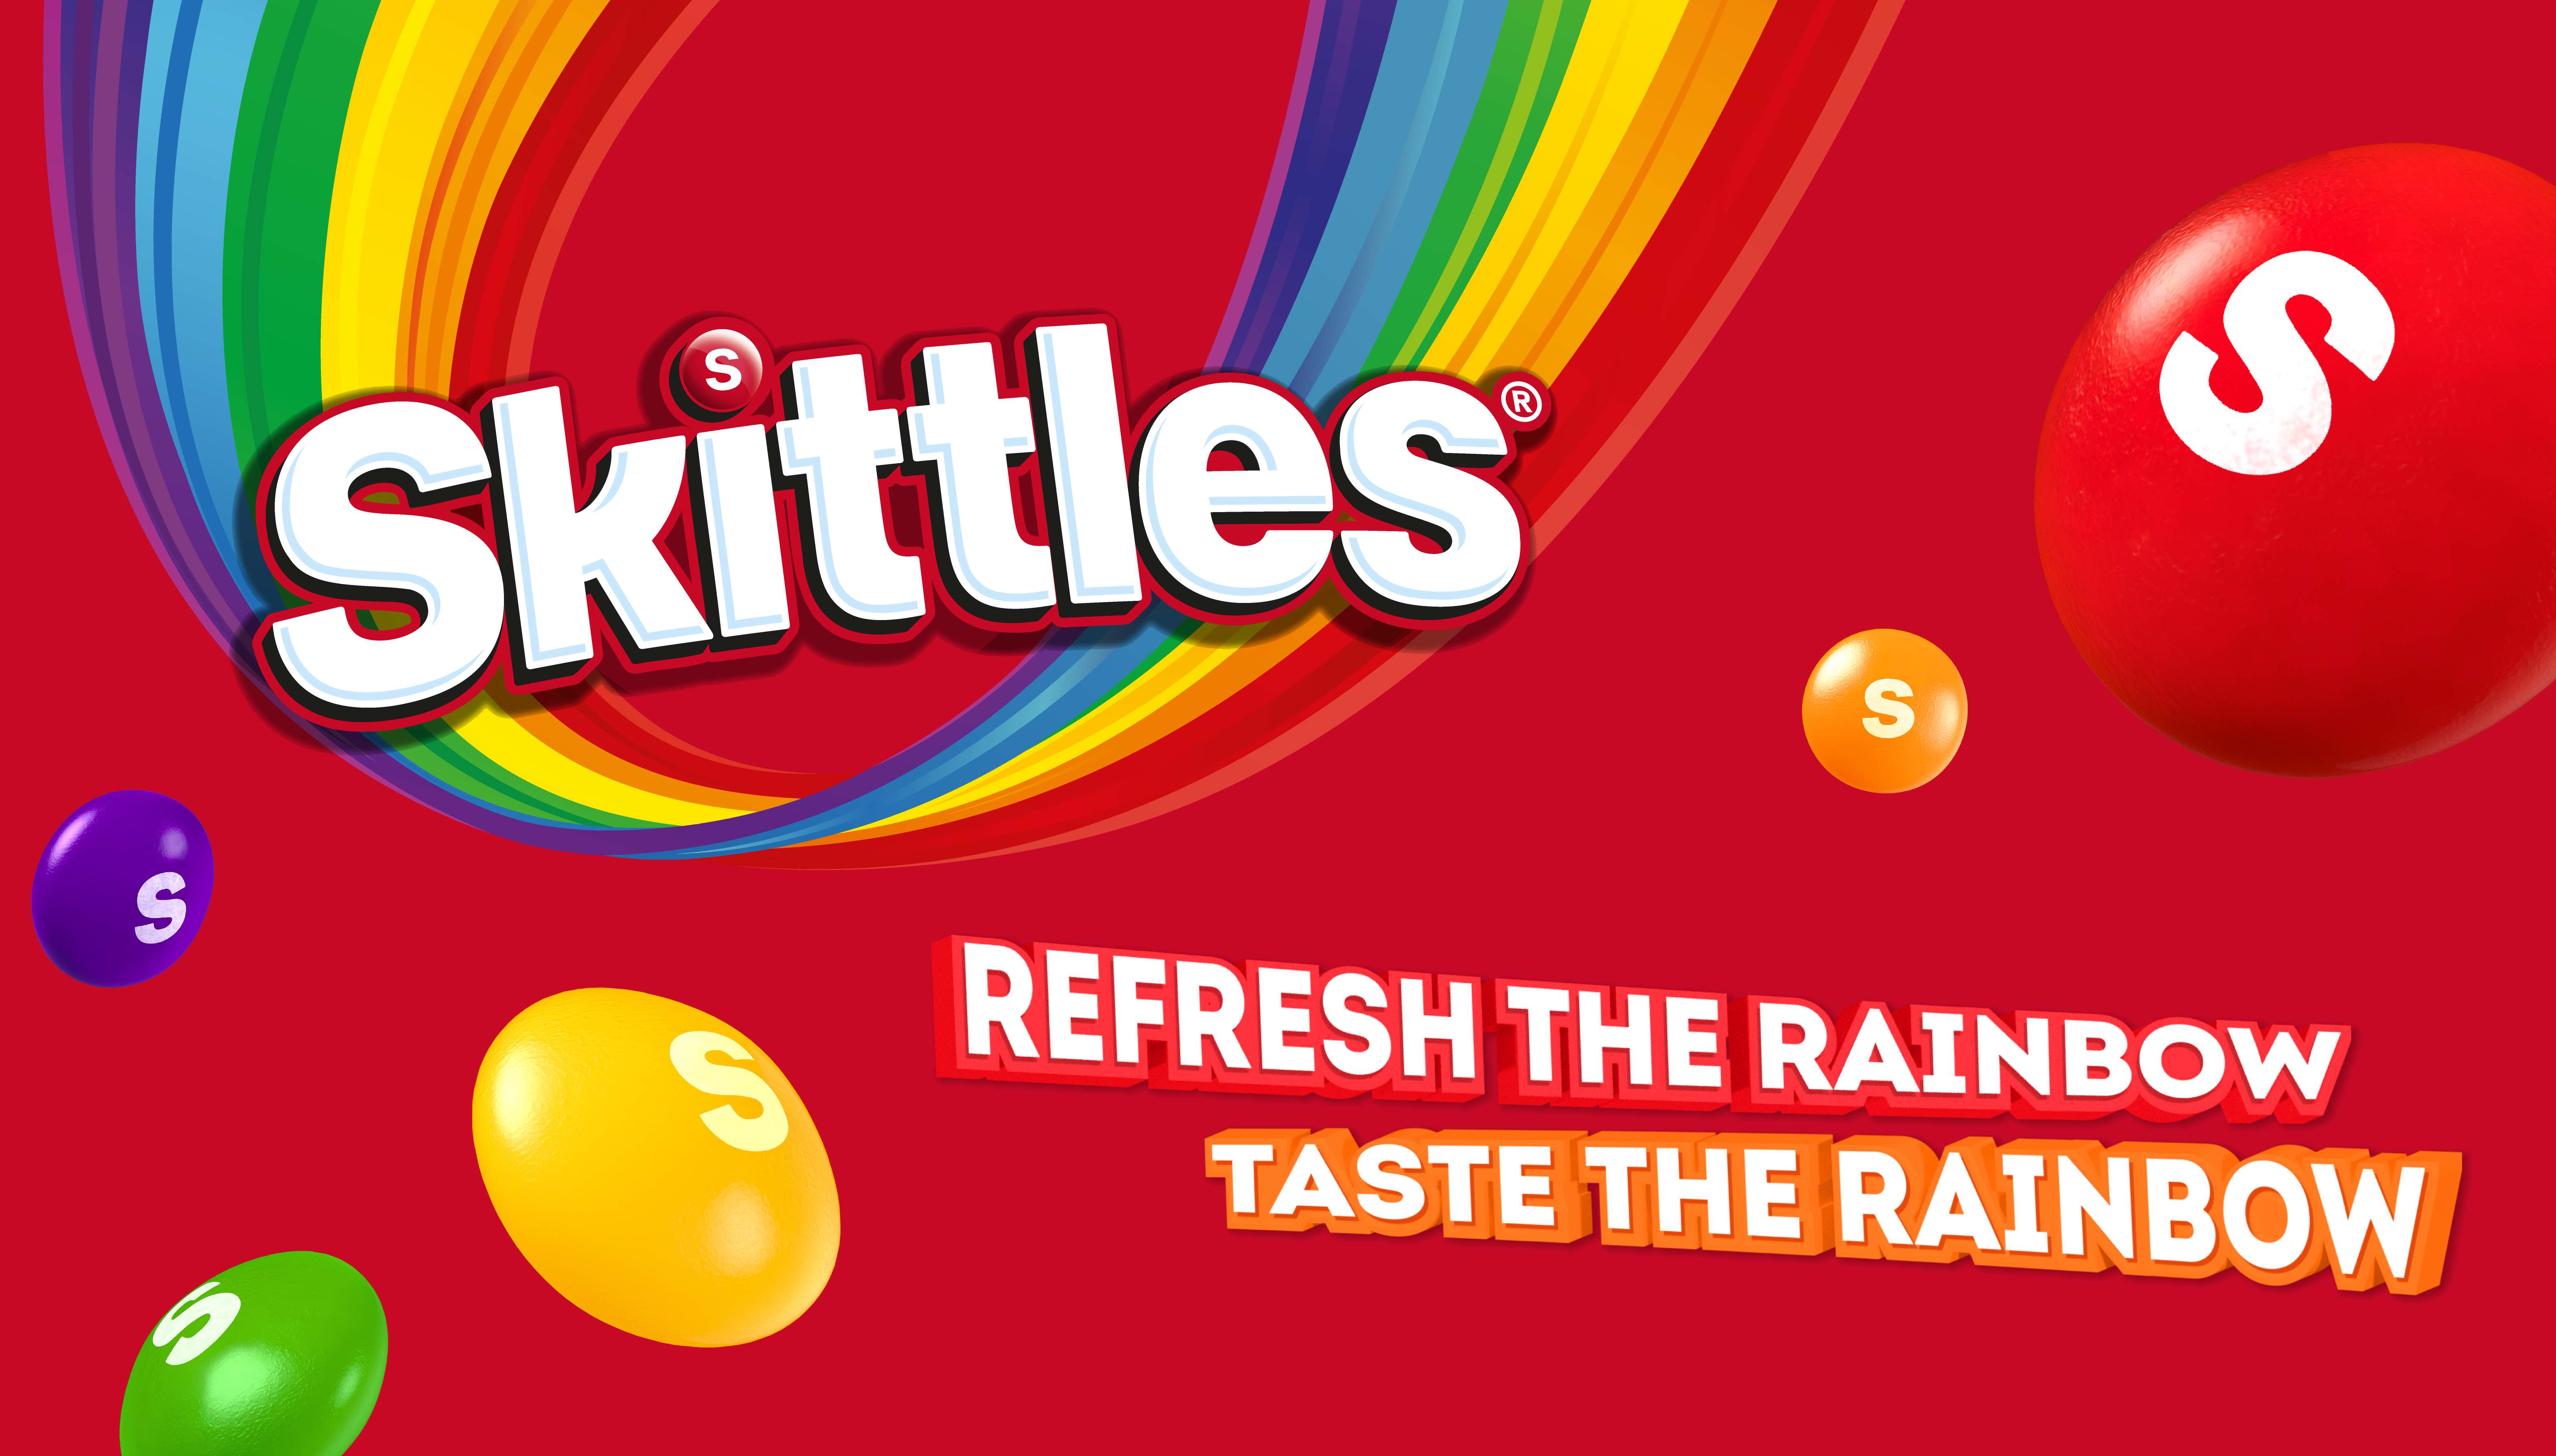 Elmwood London Celebrates Quirky Persona in Sweeping Brand Revamp for Skittles